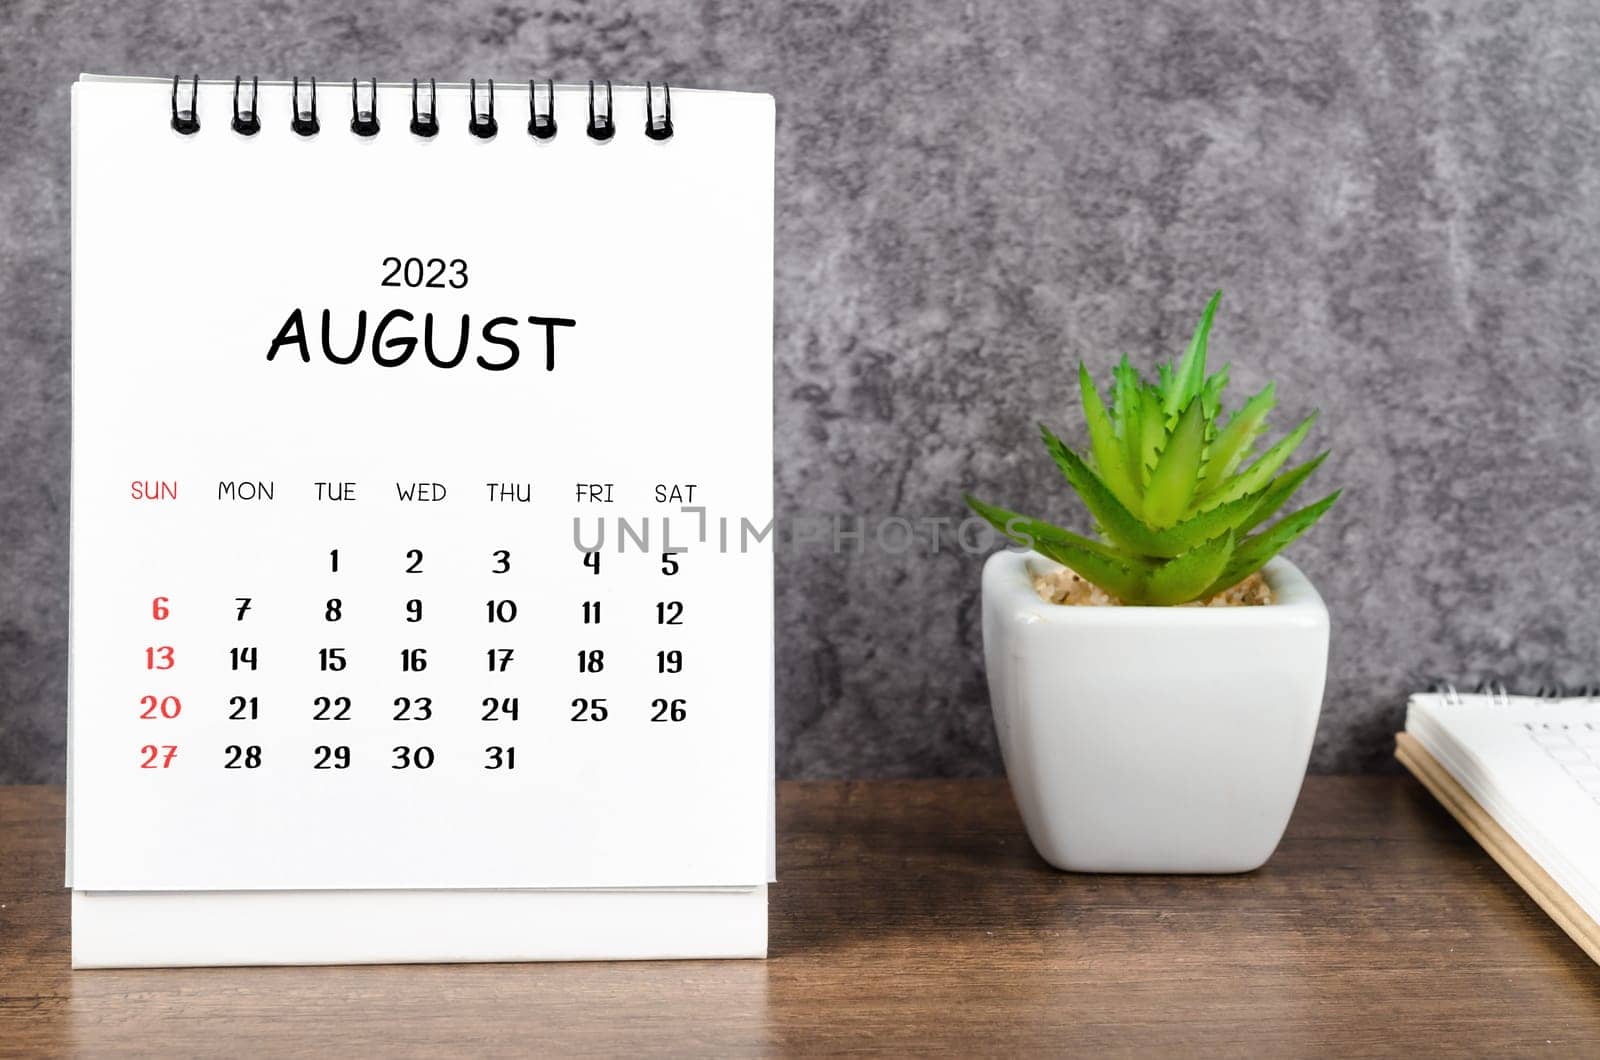 The August 2023 Monthly desk calendar for 2023 with diary on wooden table. by Gamjai